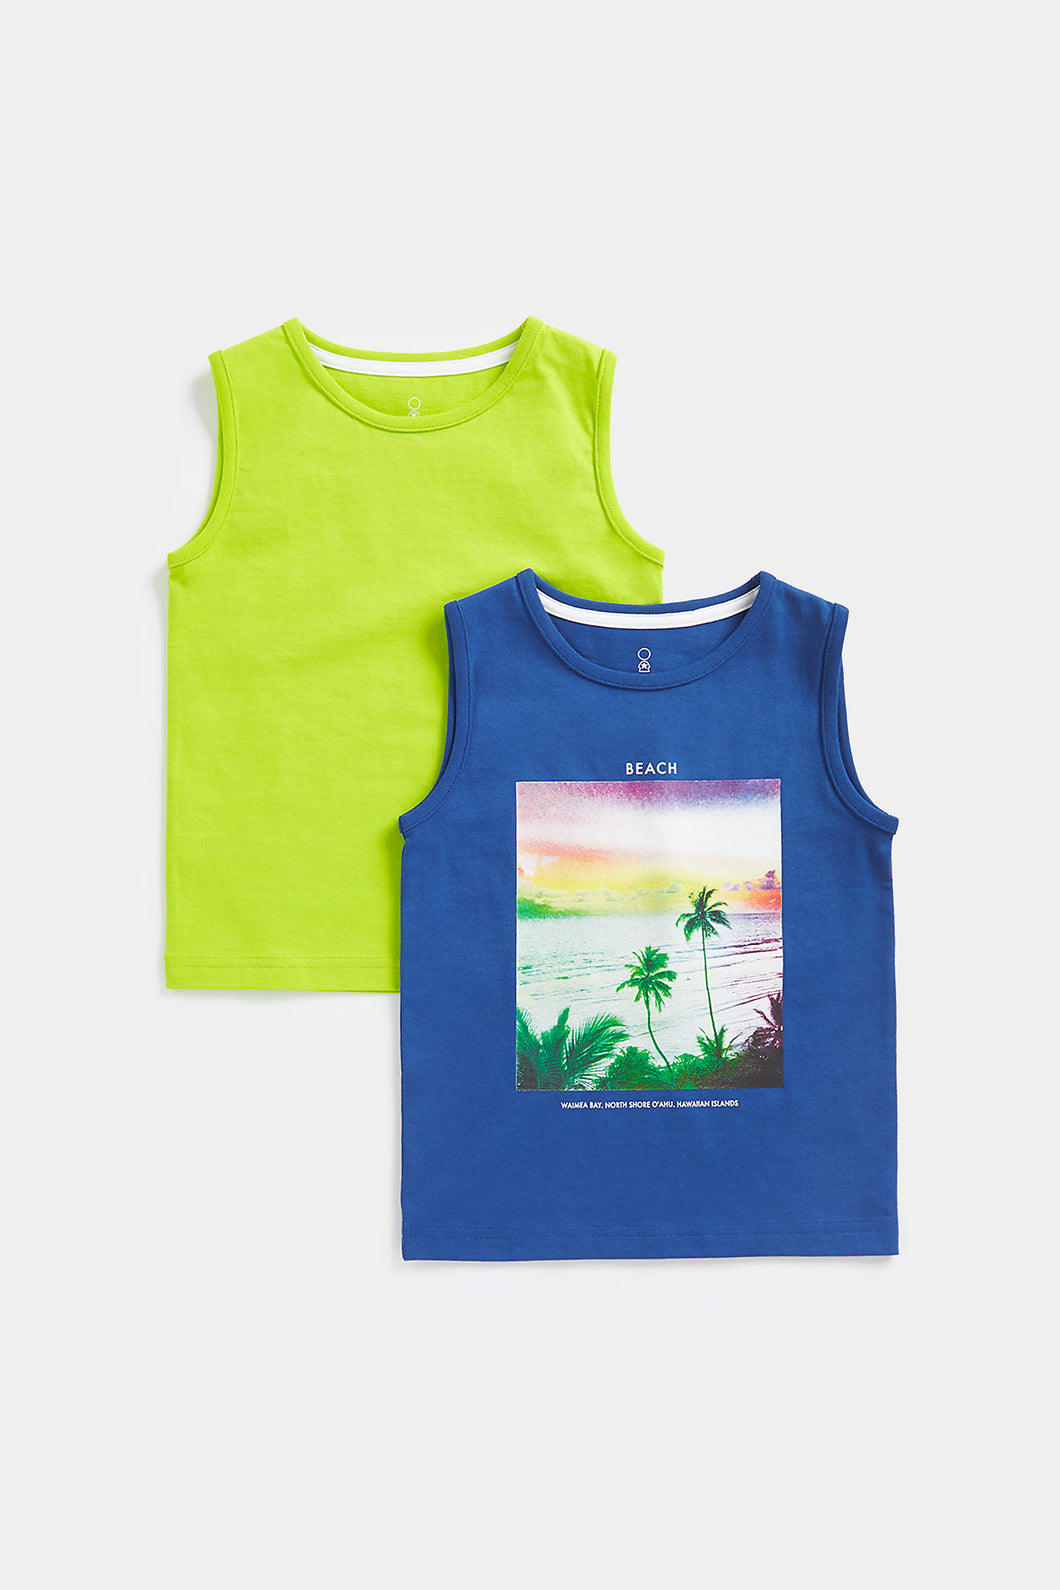 Mothercare Beach Vest T-Shirts - 2 Pack